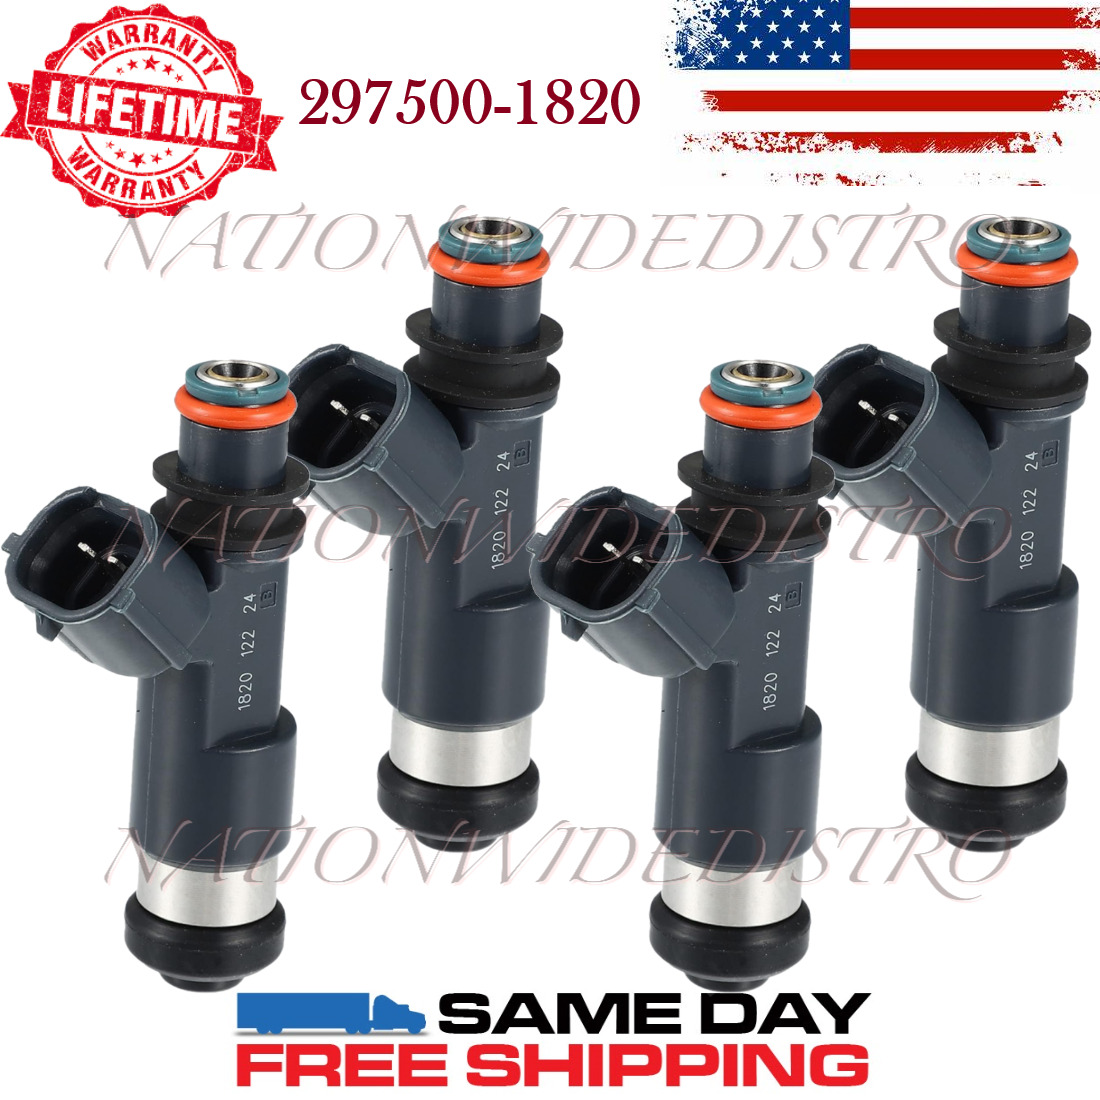 4x OEM Denso Fuel Injectors for 2011-2016 Subaru Forester 2.5L H4 297500-1820